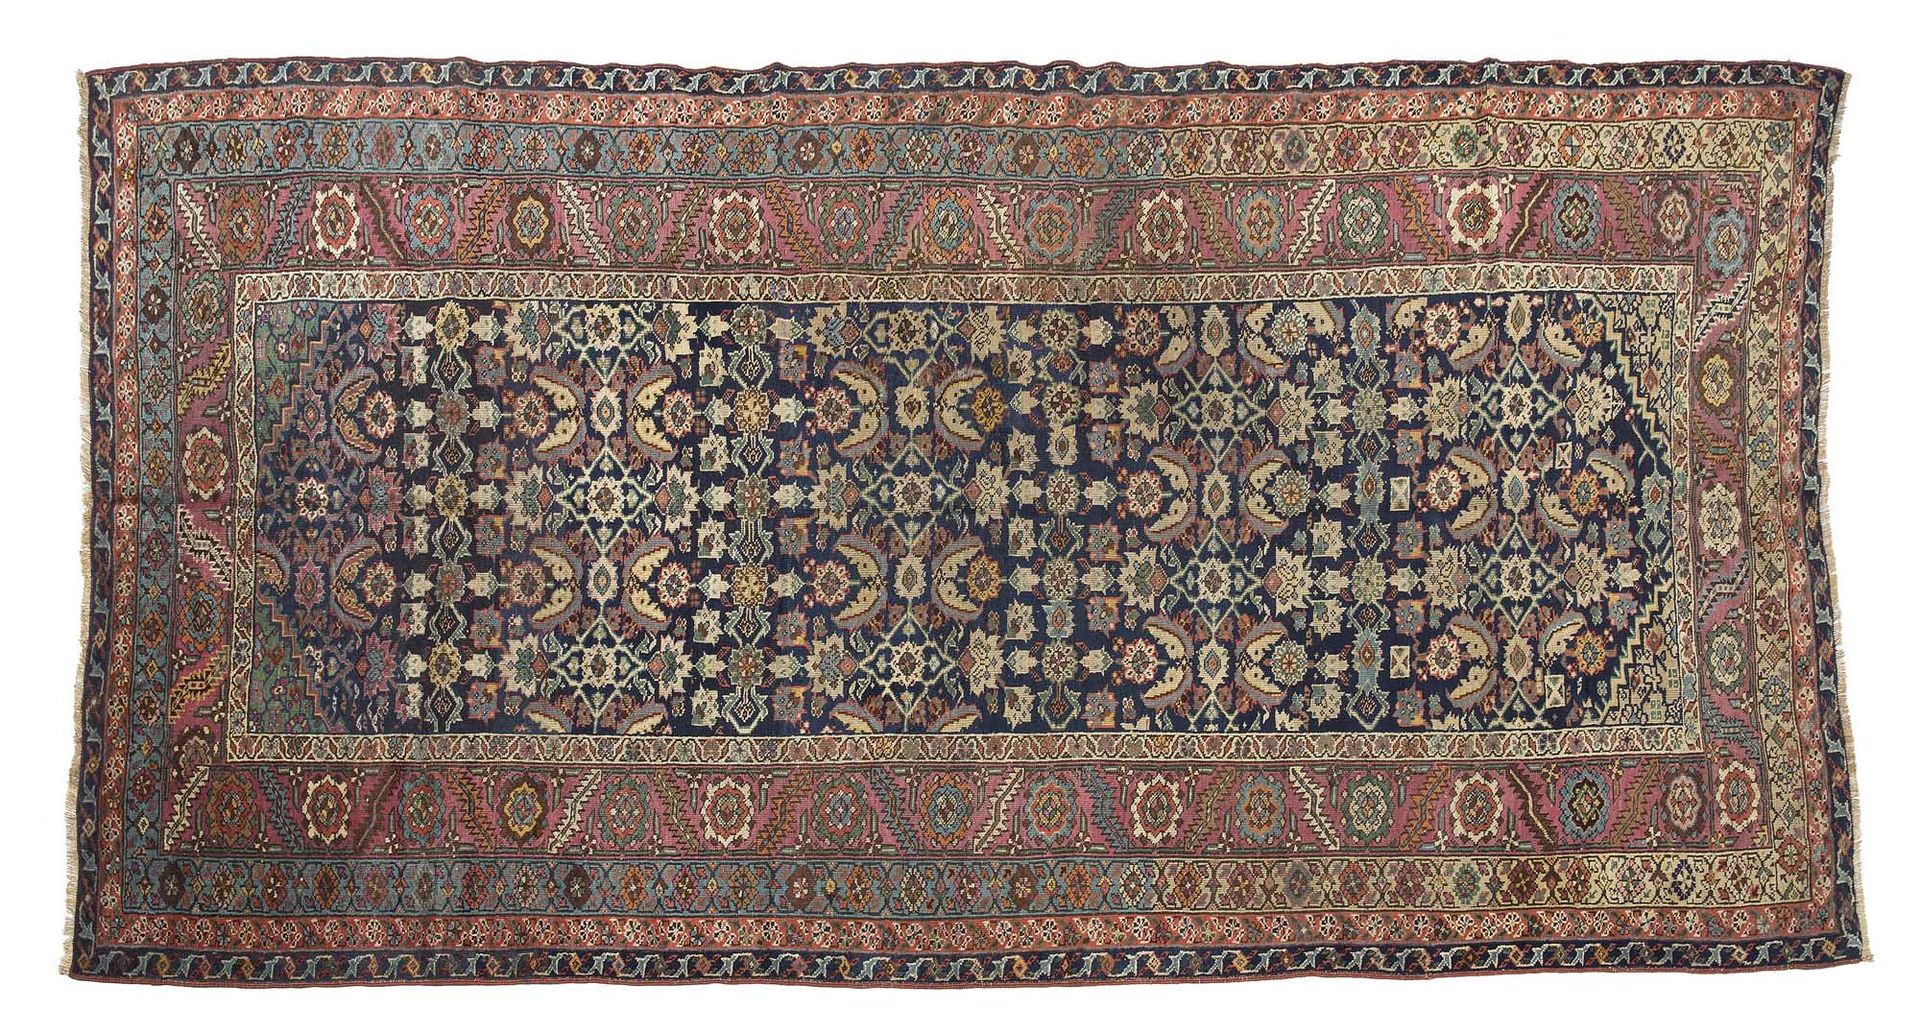 Null BAKHEISH carpet (Persia), late 18th century, early 19th century

Dimensions&hellip;